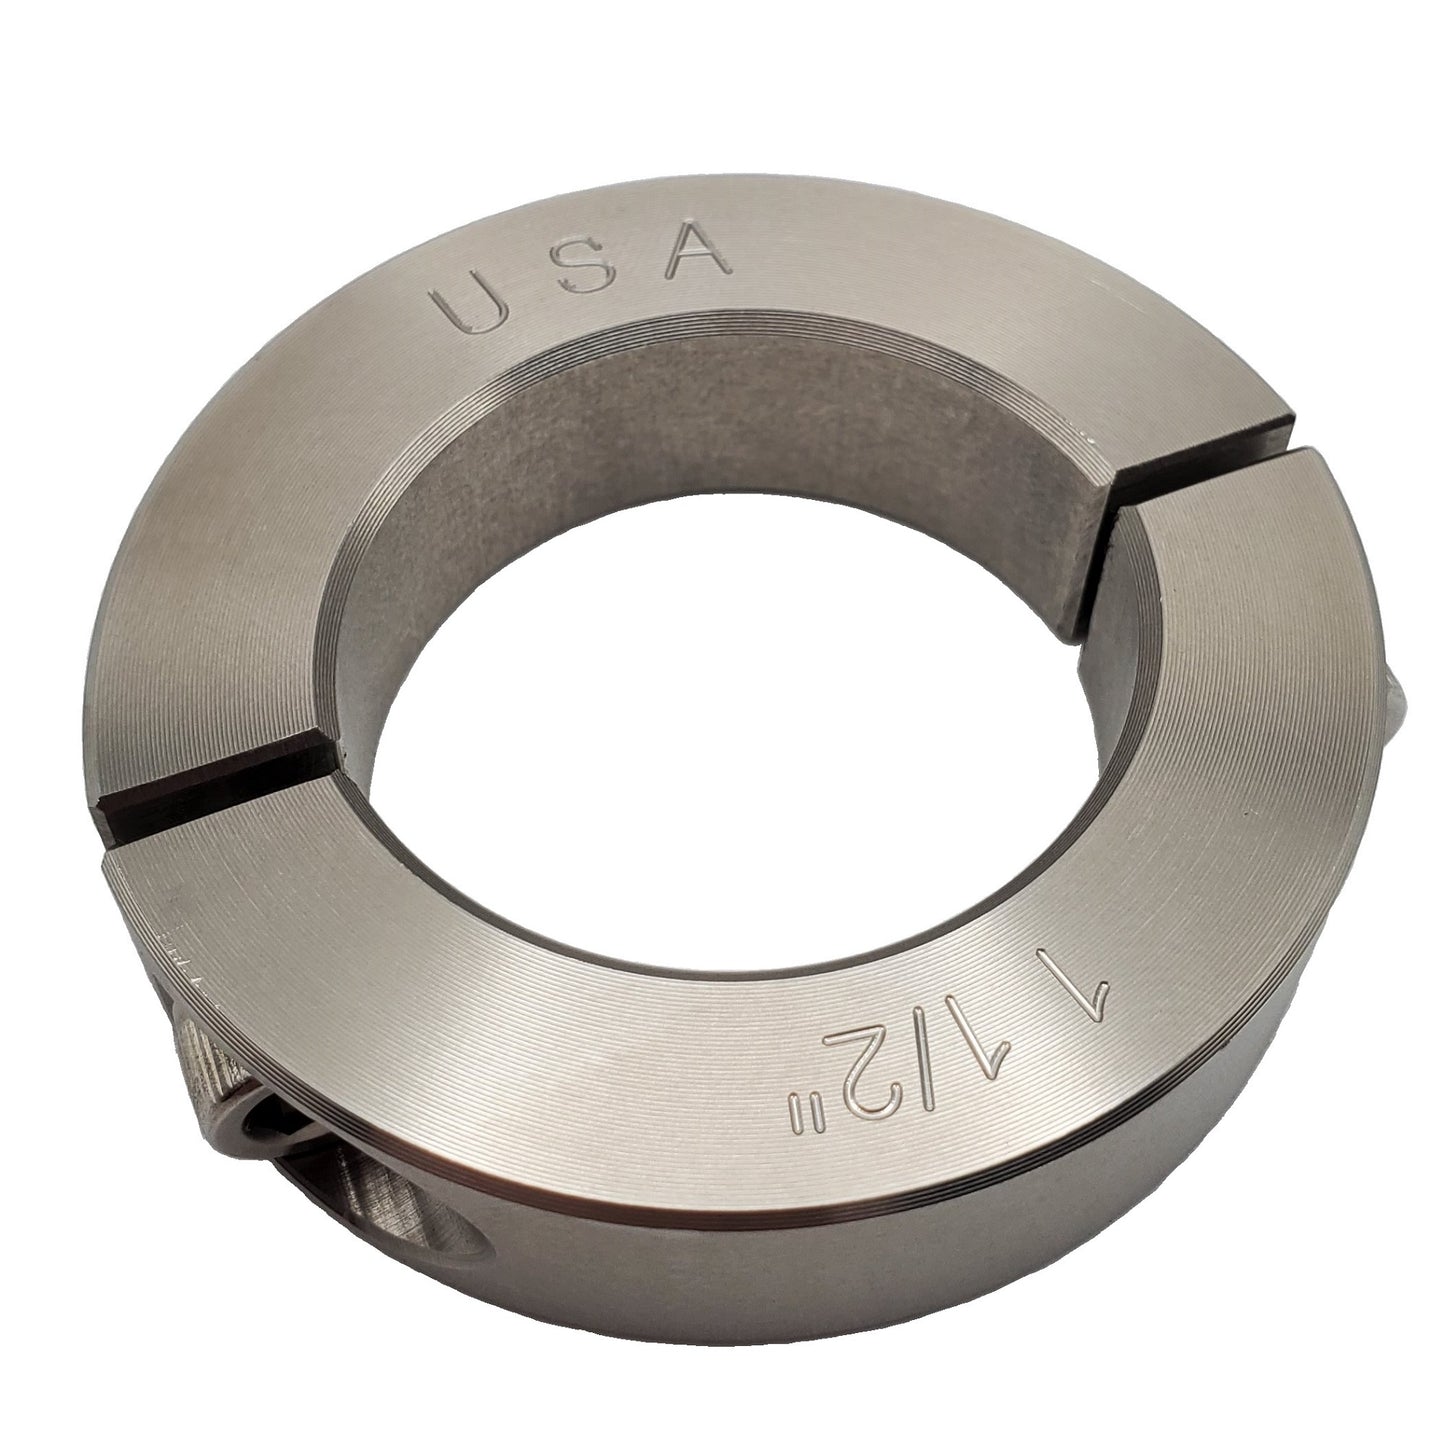 1.50" Diameter - Clamping Two Piece Shaft Collar - 303 Stainless Steel